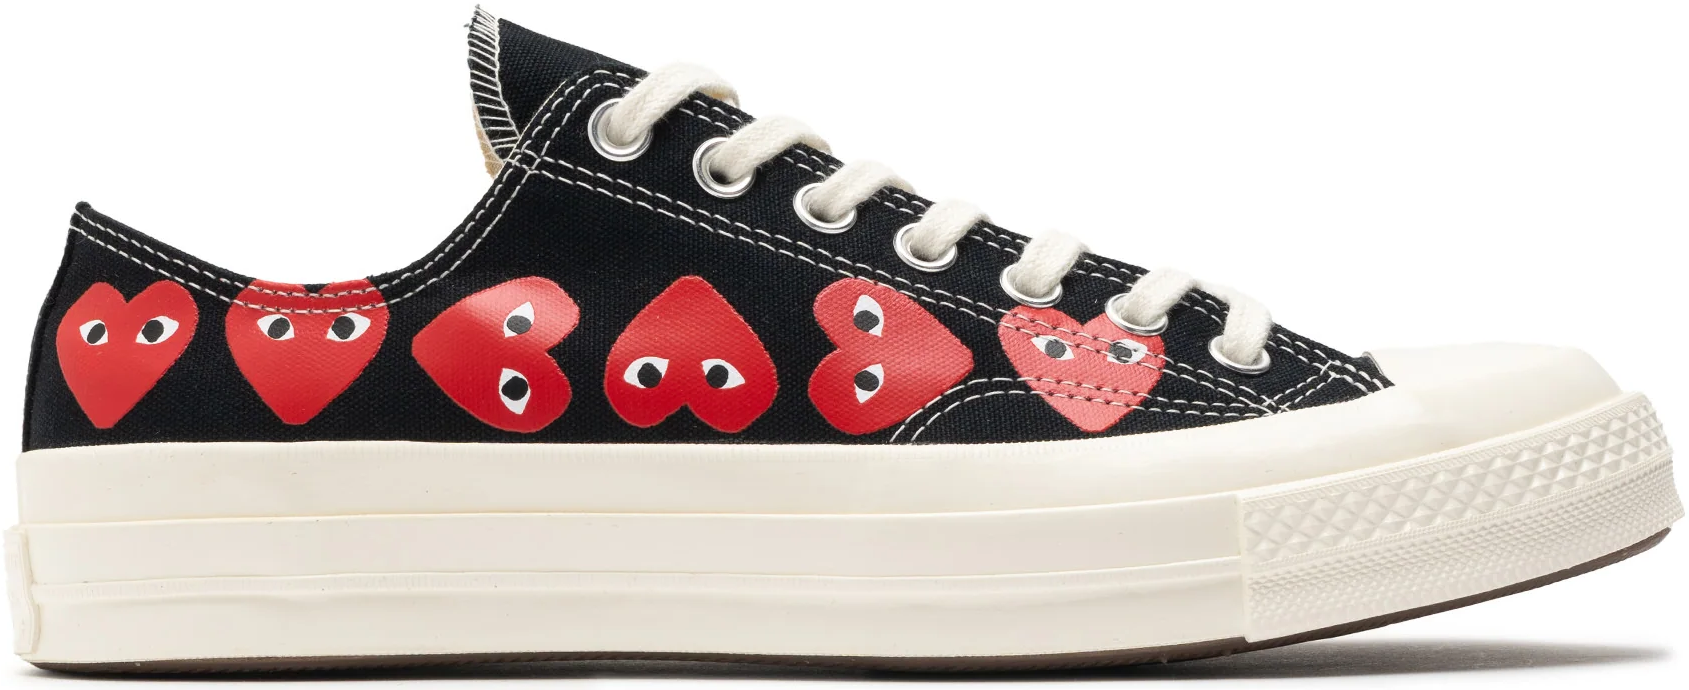 Converse Chuck Taylor All Star 70 Ox Comme des Garcons Play Multi-Heart Black Red